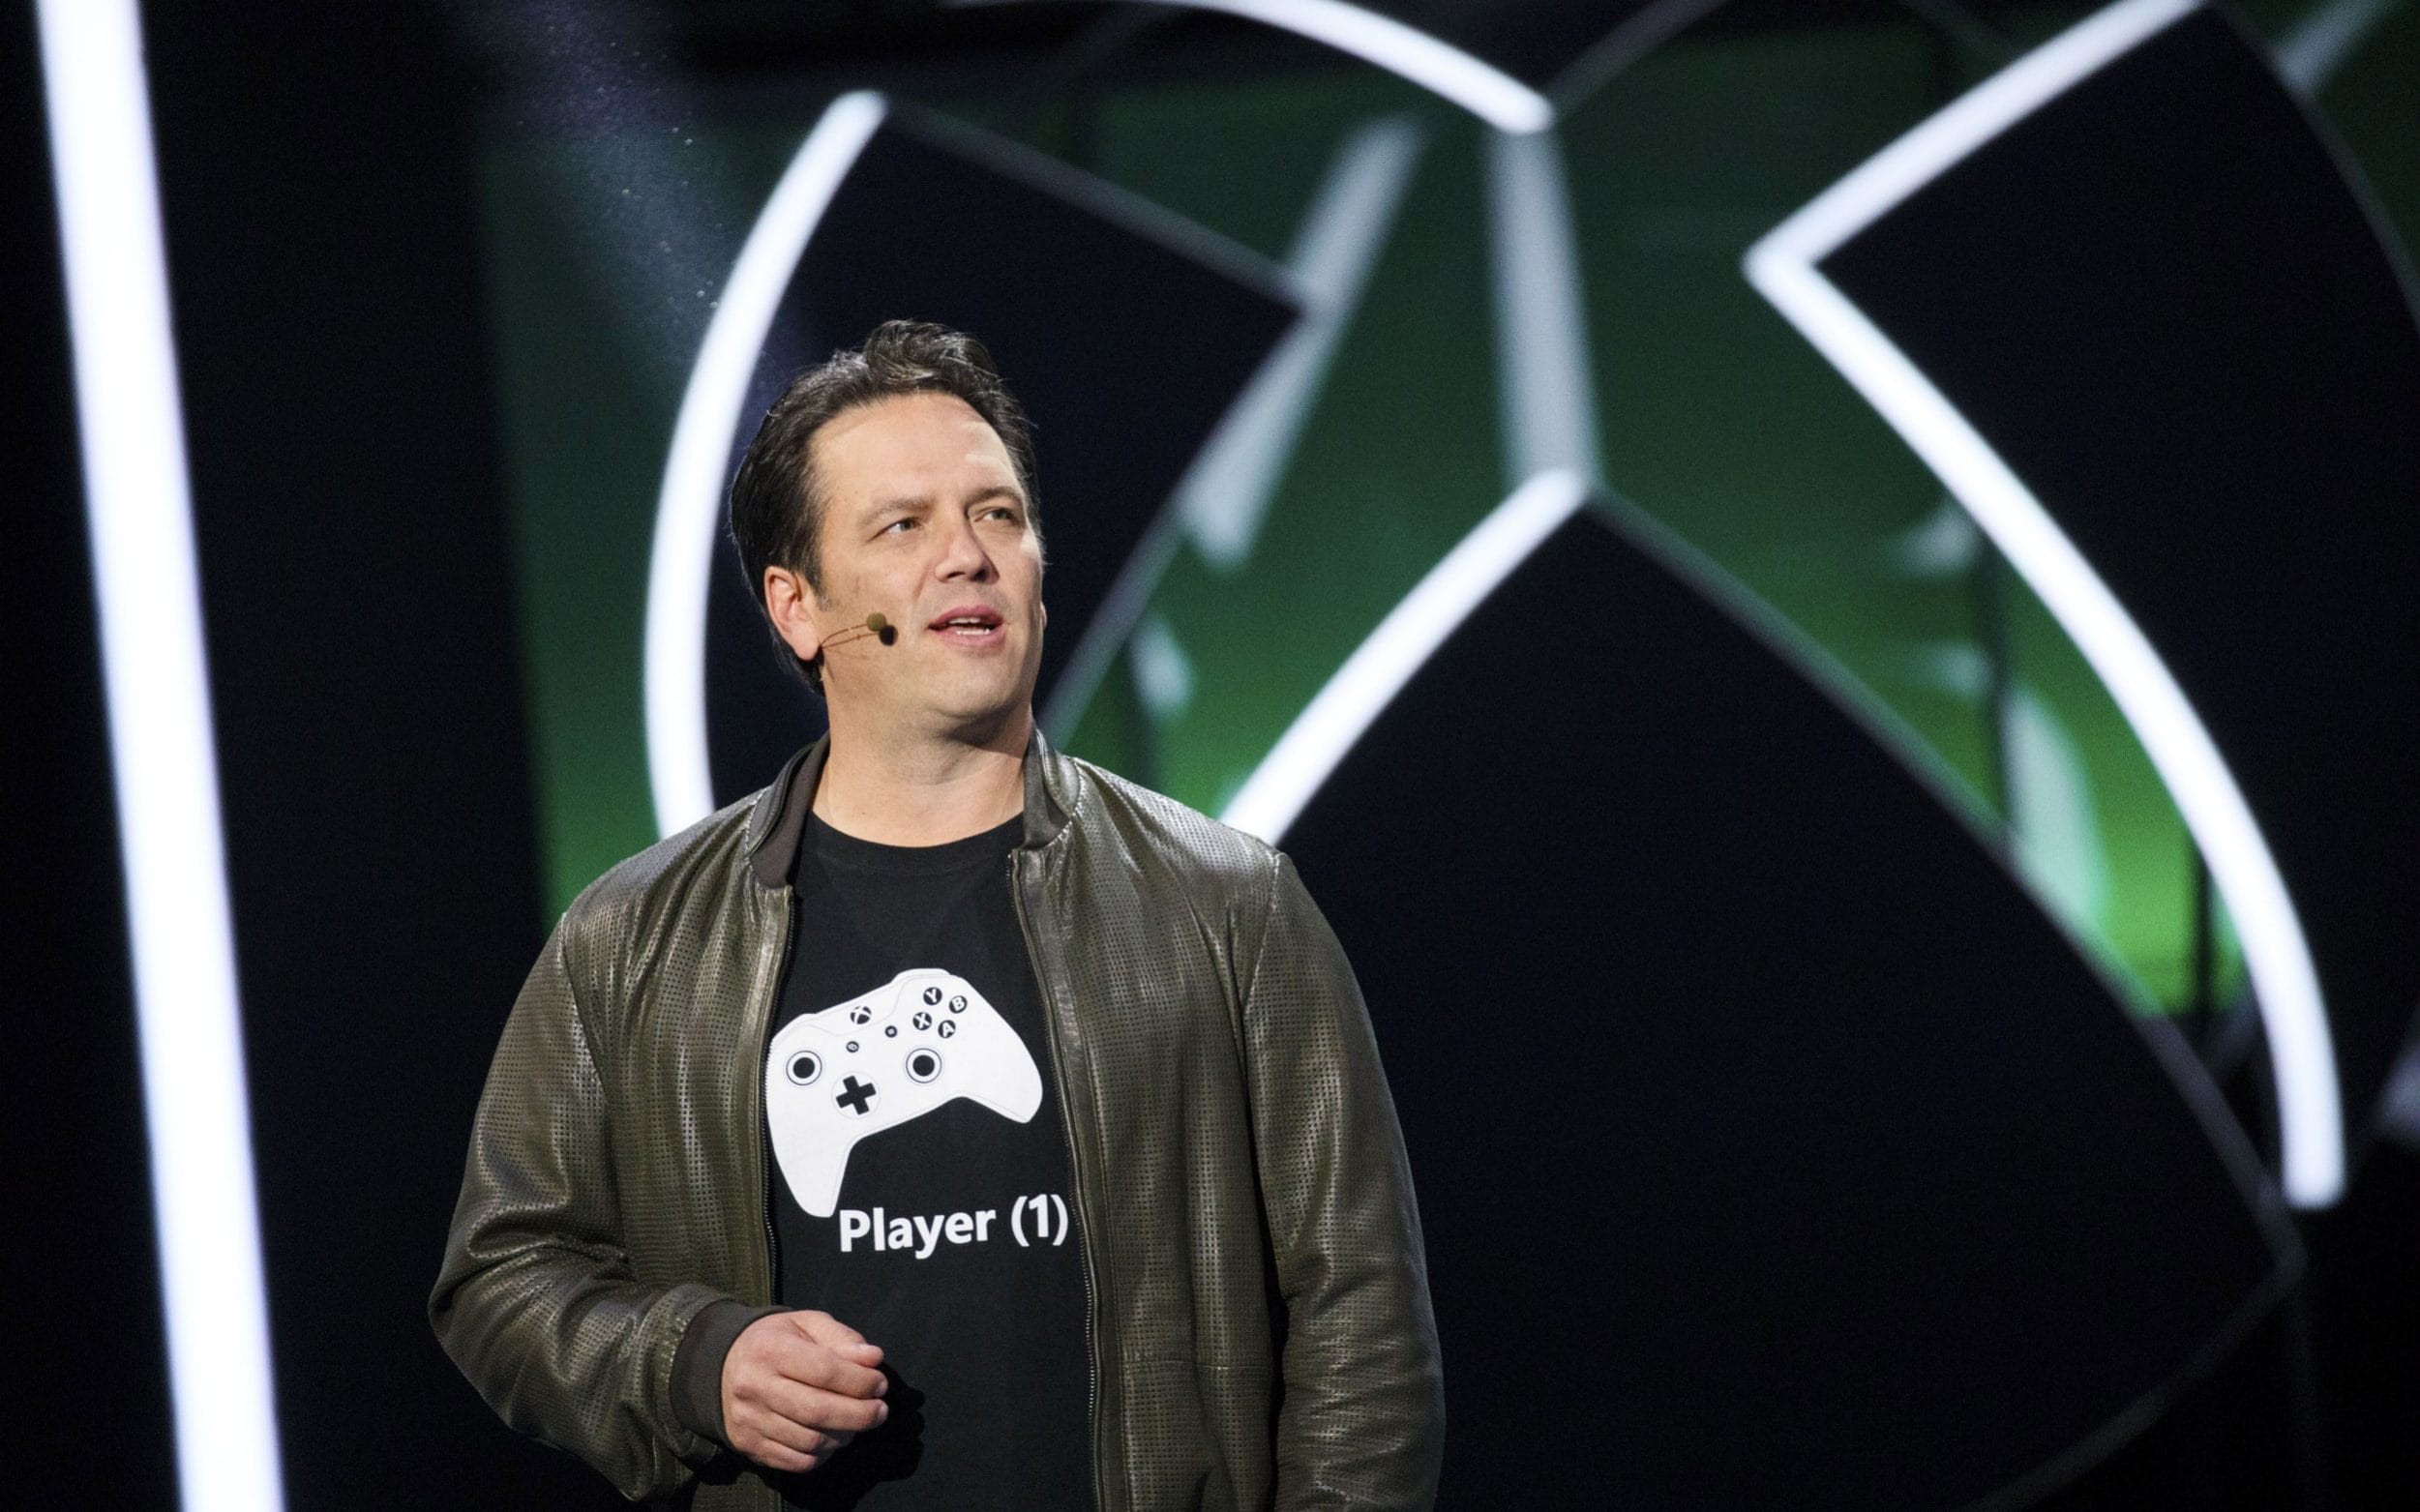 Phil Spencer Comments On The Possibility Of Xbox Game Pass Coming